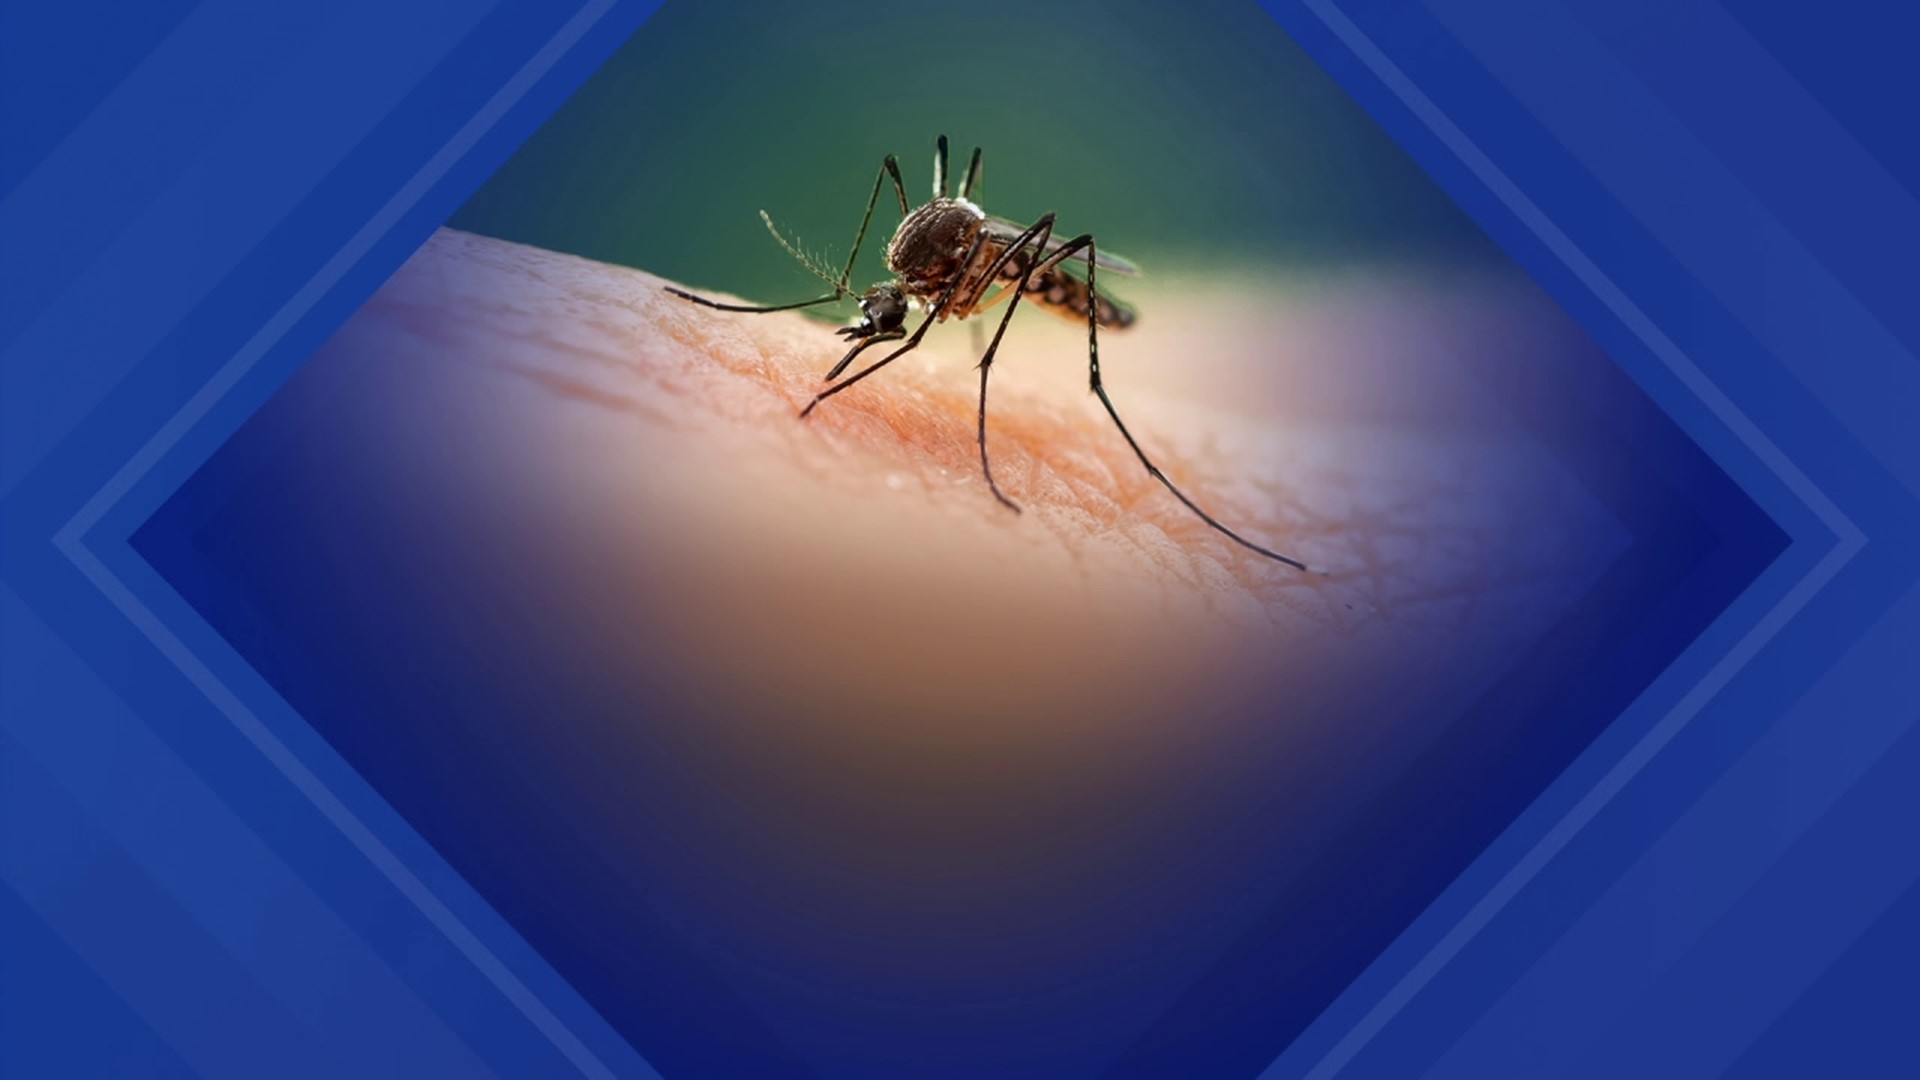 The virus was detected in several counties across northeastern and central Pennsylvania. Most recently, it was found in Lackawanna County.